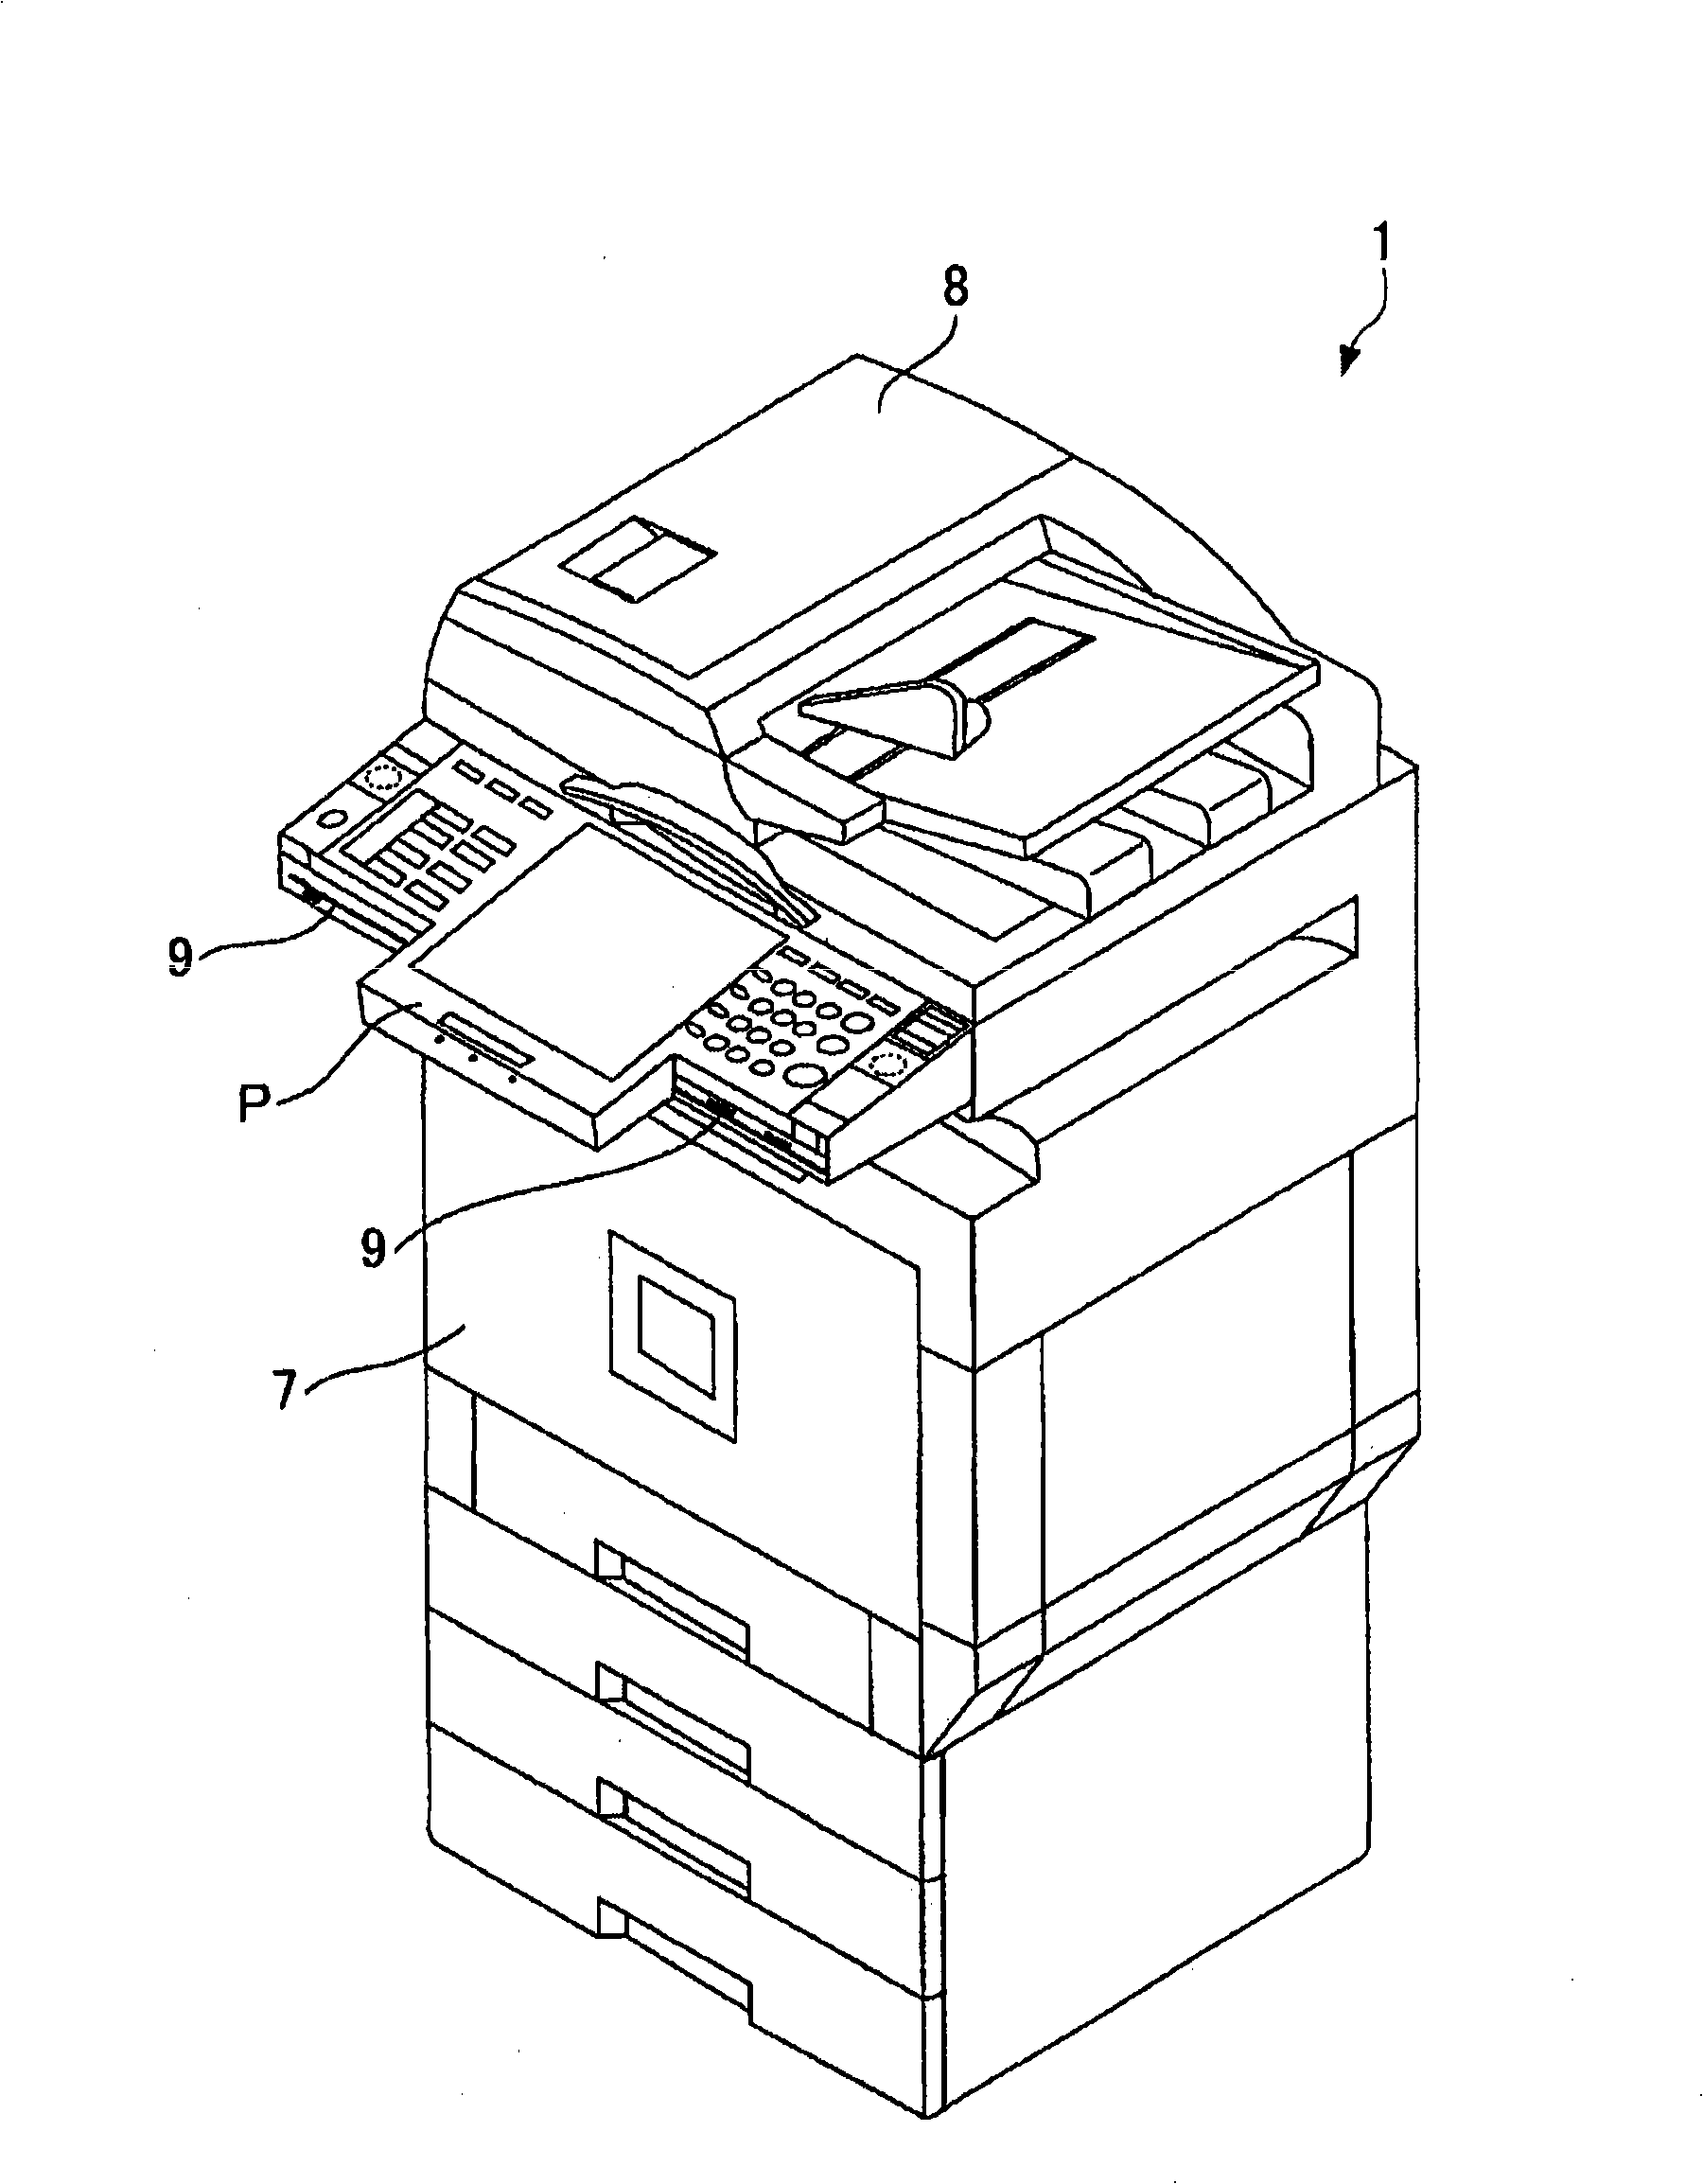 Image forming apparatus and blank sheet ejection preventing method